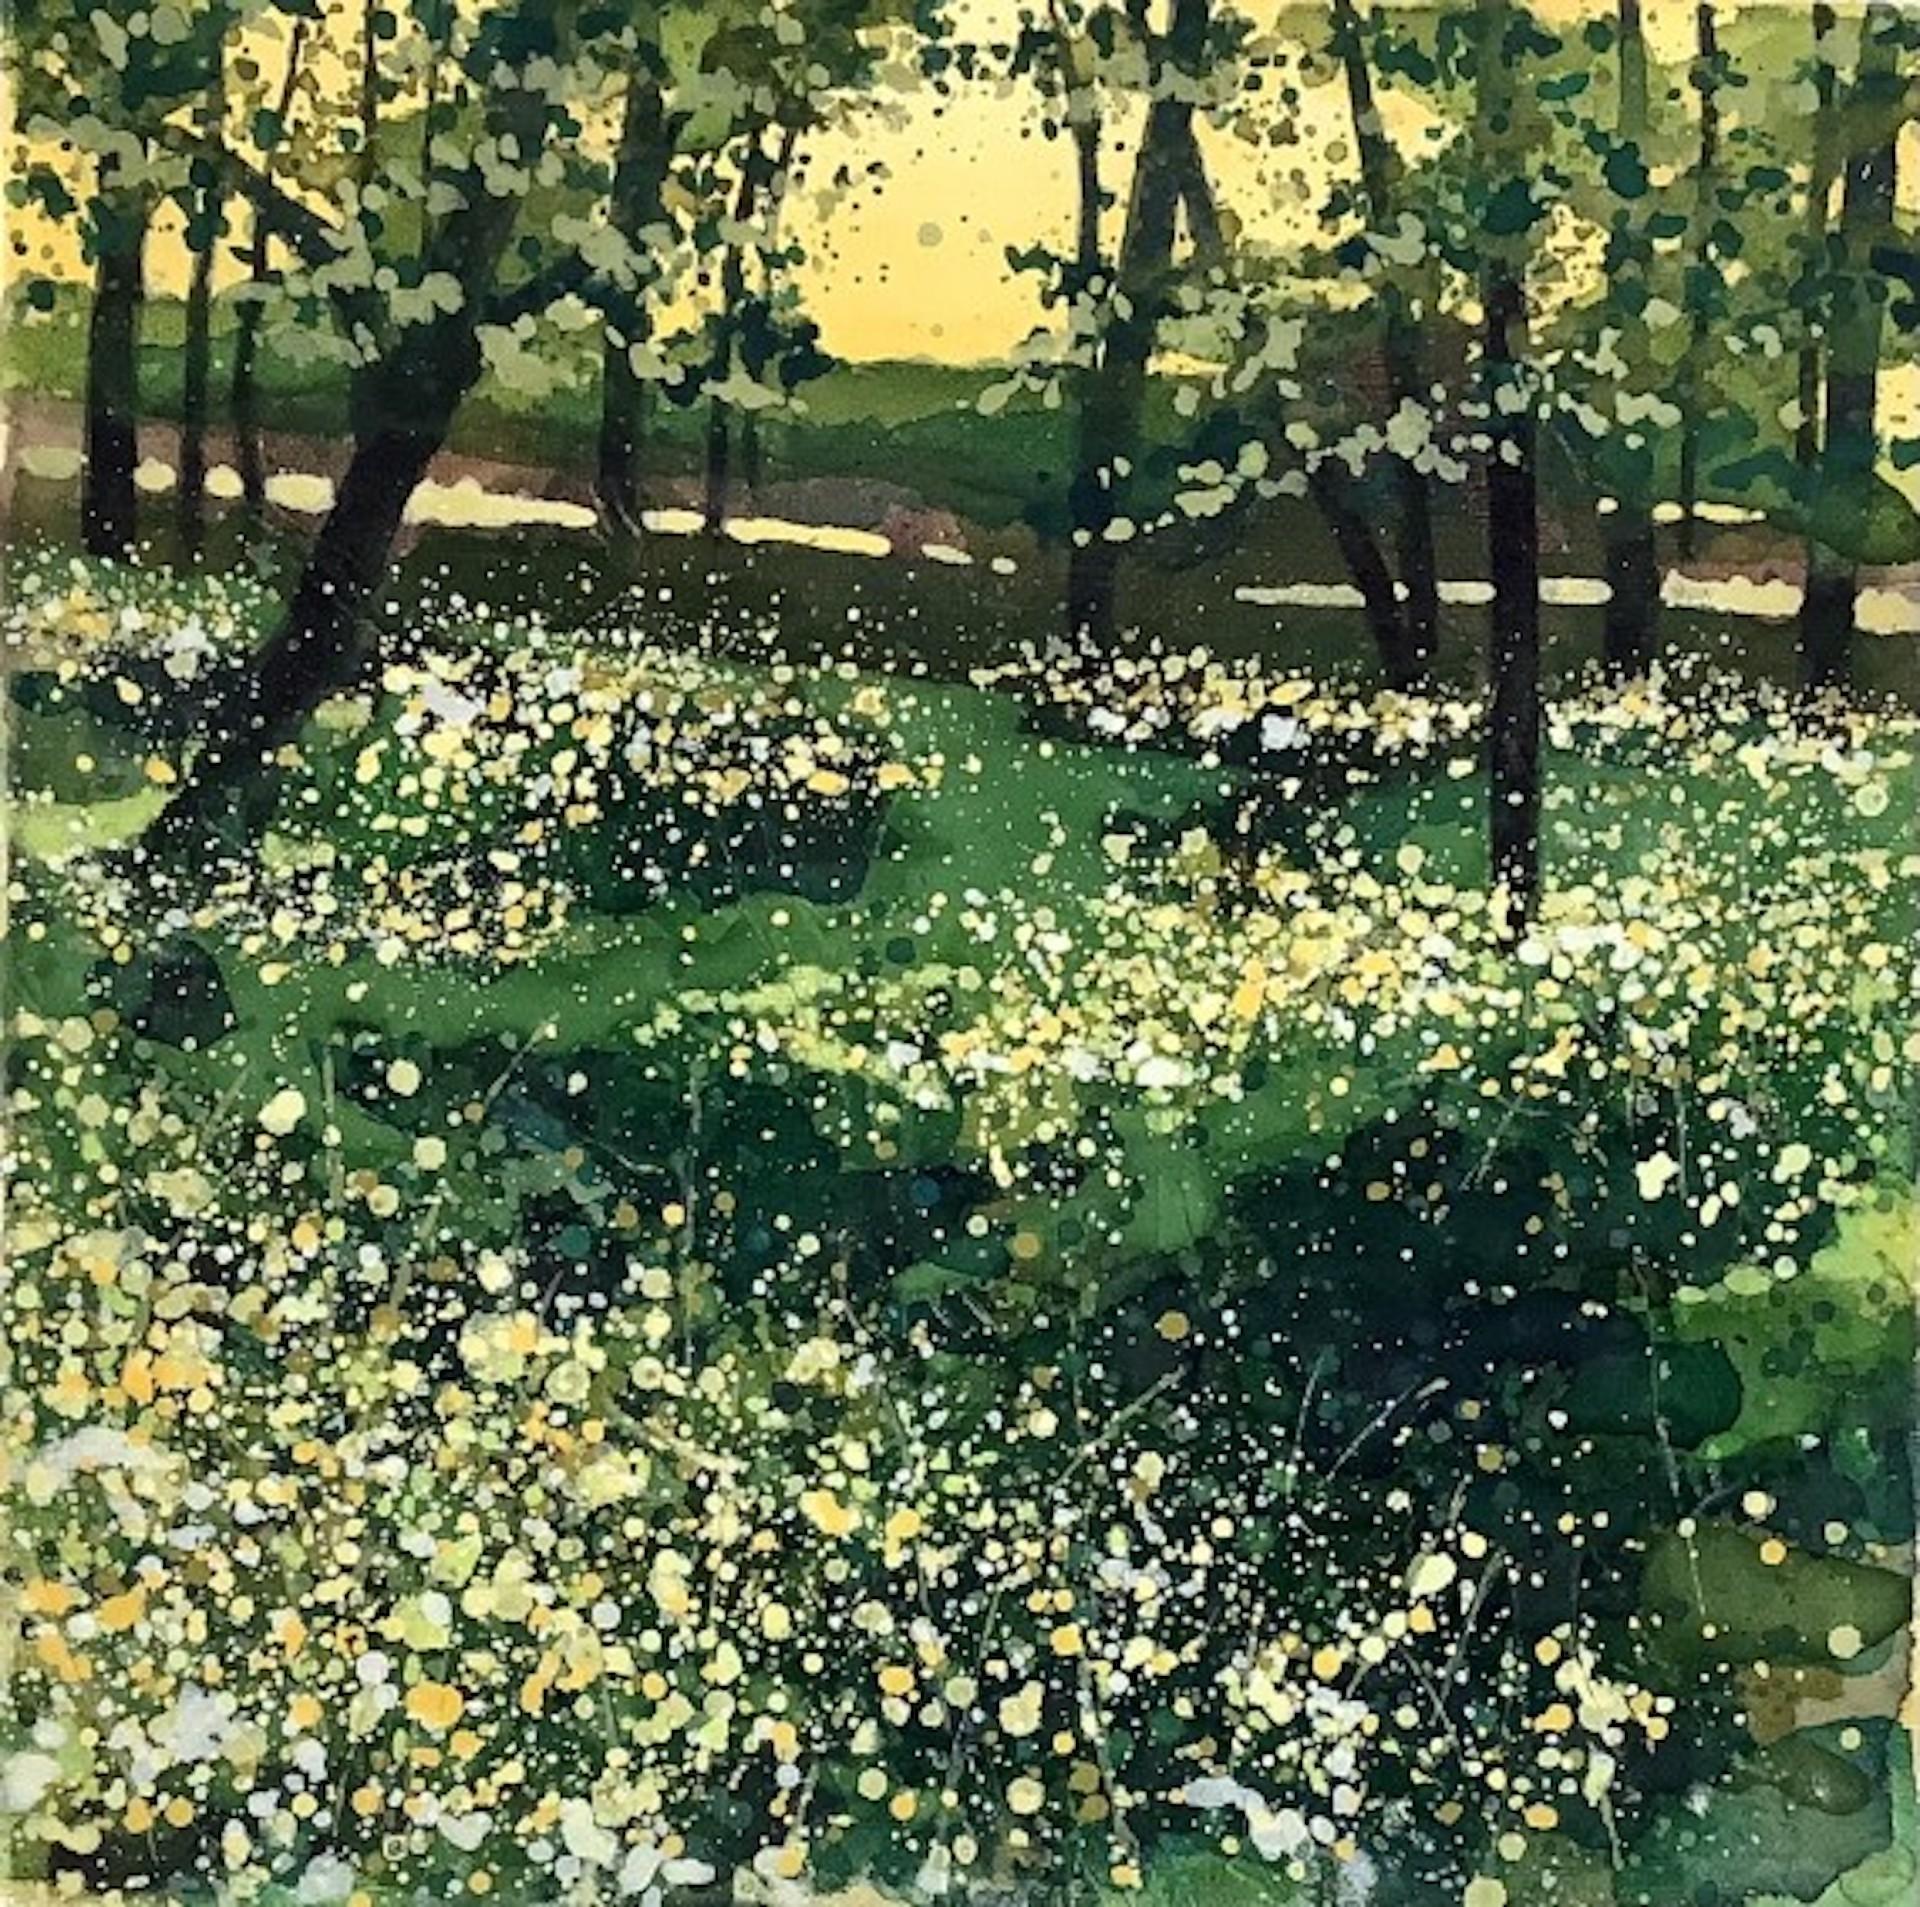 Buttercup Meadow [2021]
Original
Landscape
Acrylic and acrylic inks
Image size: H:30 cm x W:30 cm
Framed Size: H:35 cm x W:35 cm x D:5cm
Sold Framed
Please note that insitu images are purely an indication of how a piece may look

'Buttercup Meadow'